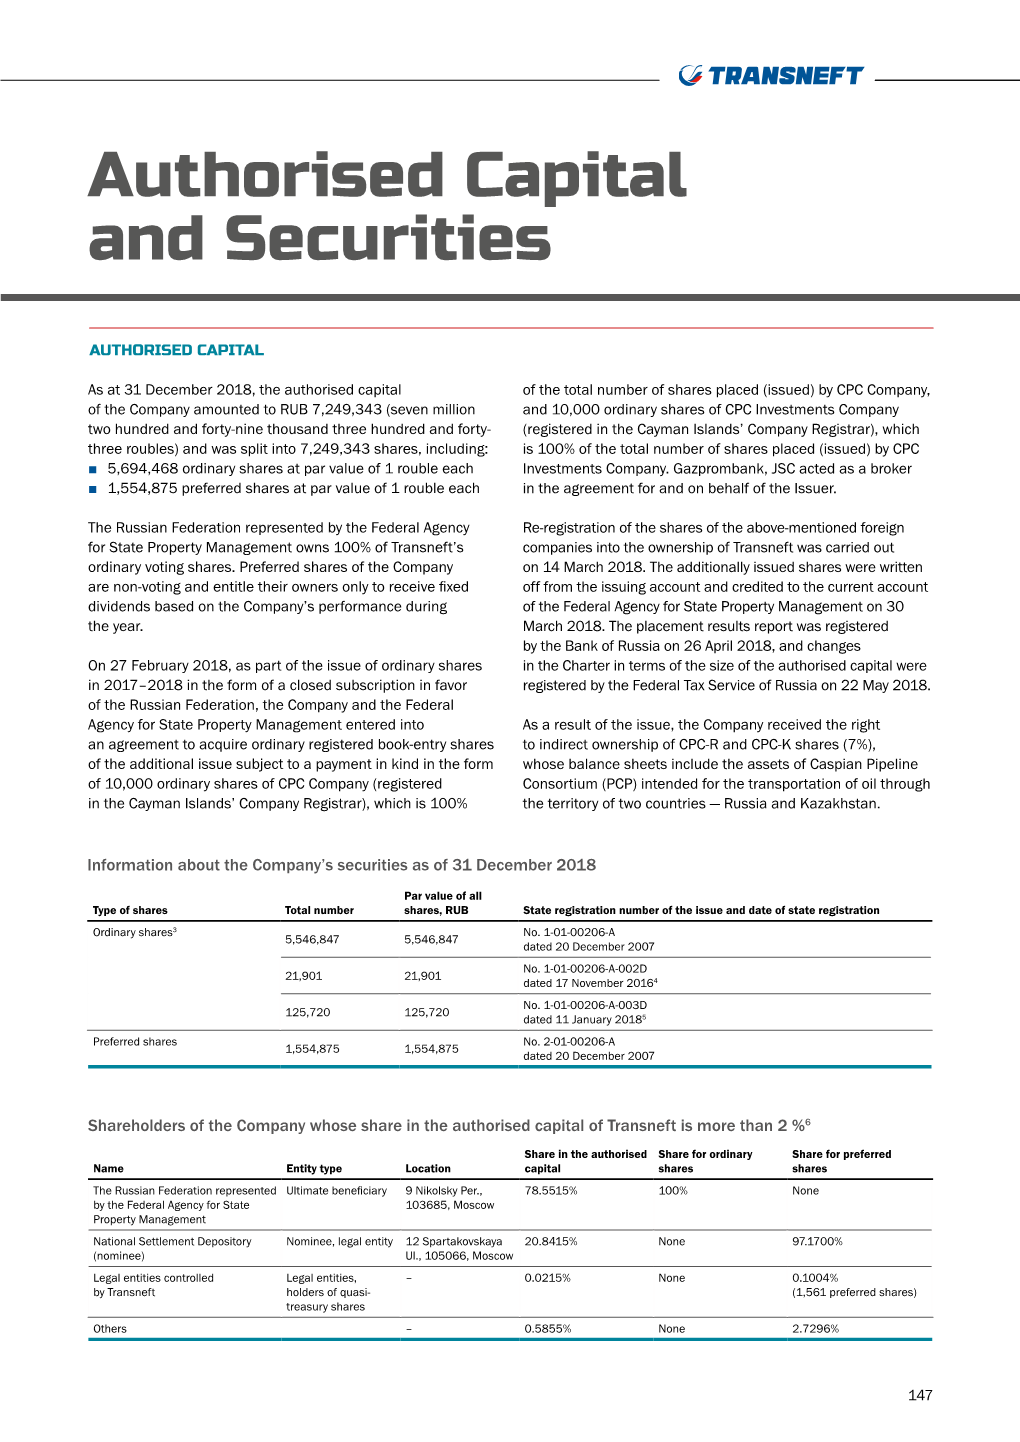 Authorised Capital and Securities